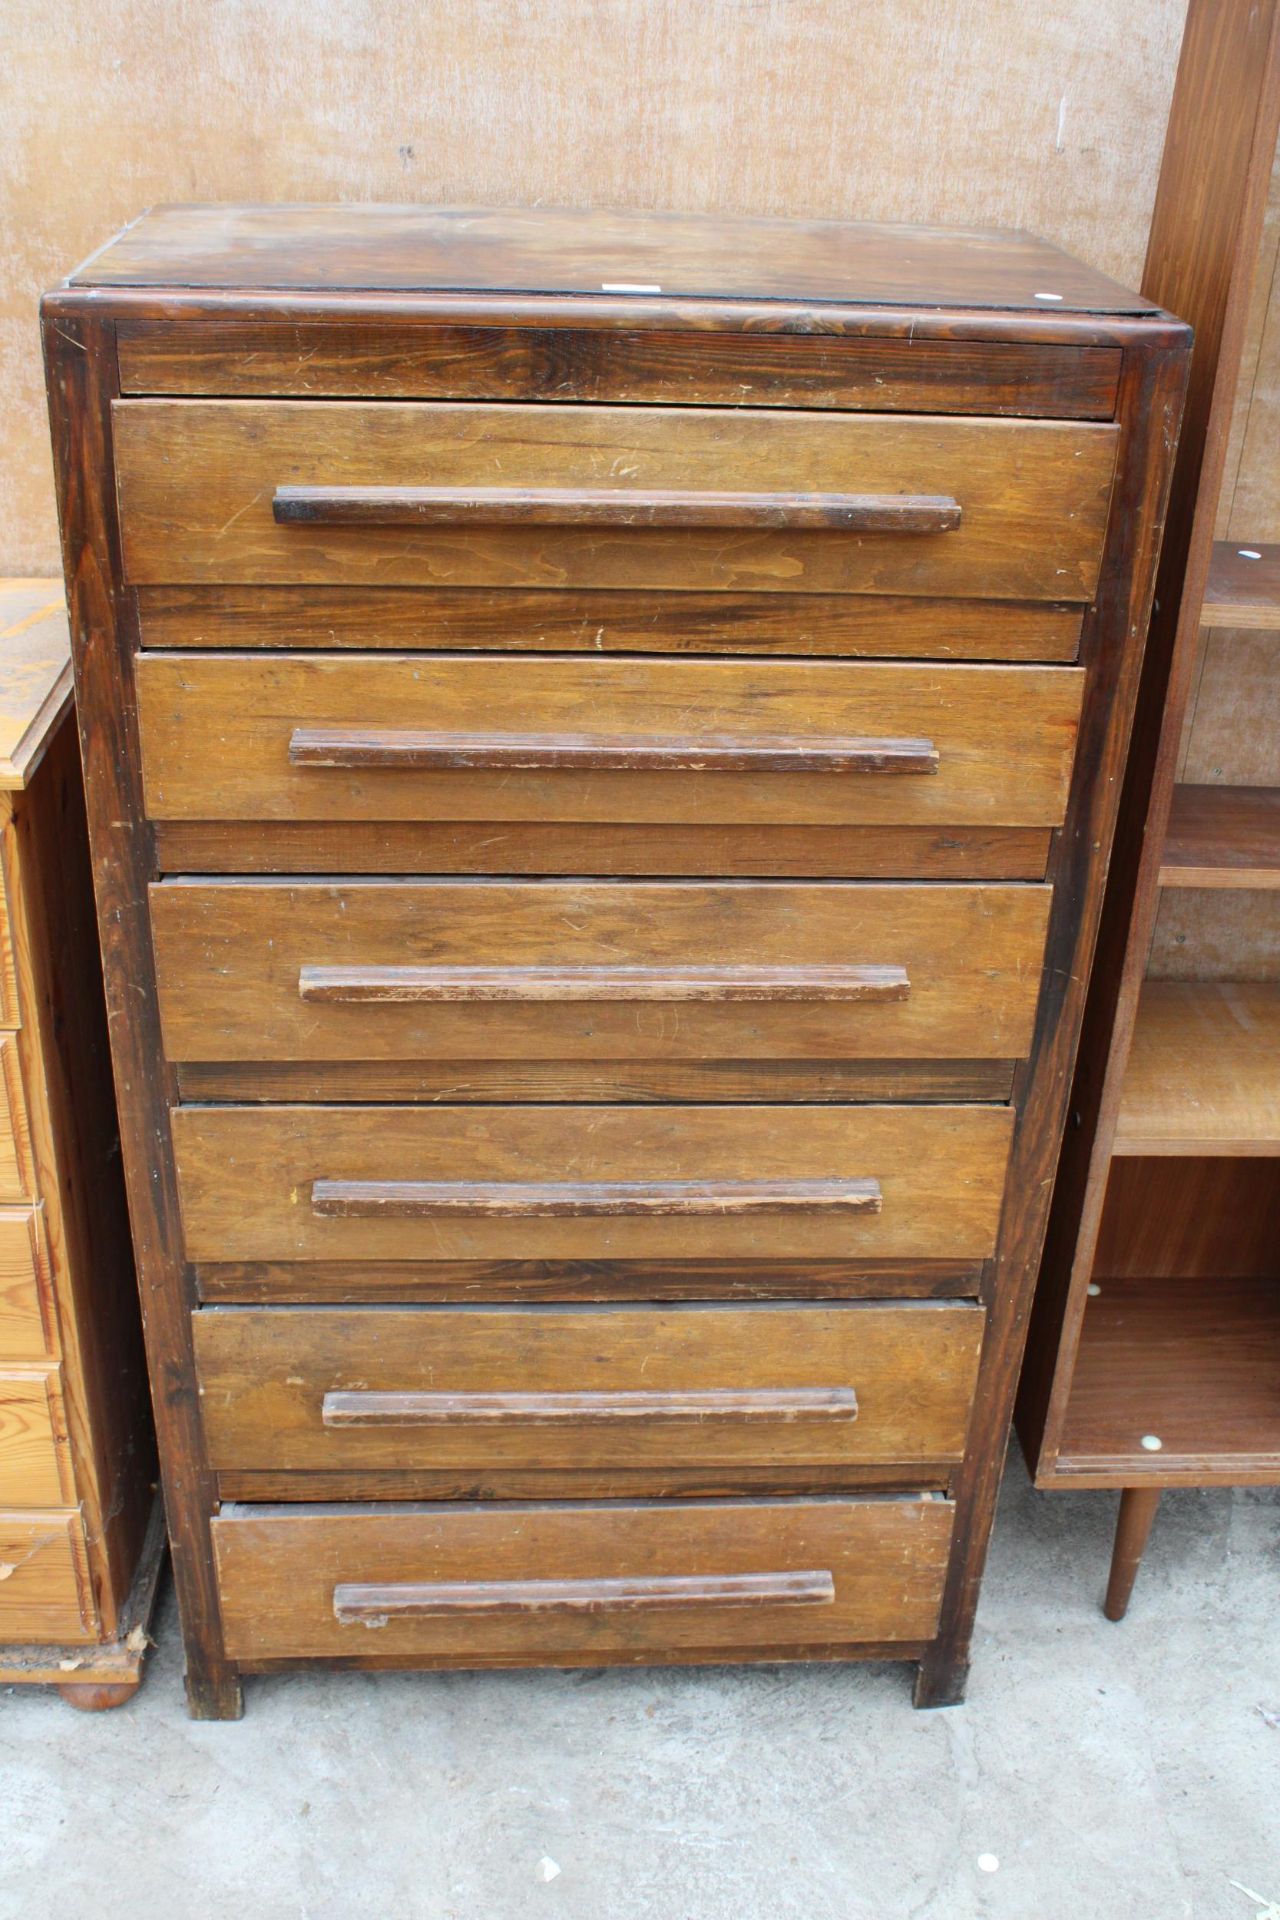 A MID 20TH CENTURY CHEST OF SIX DRAWERS - 30" WIDE